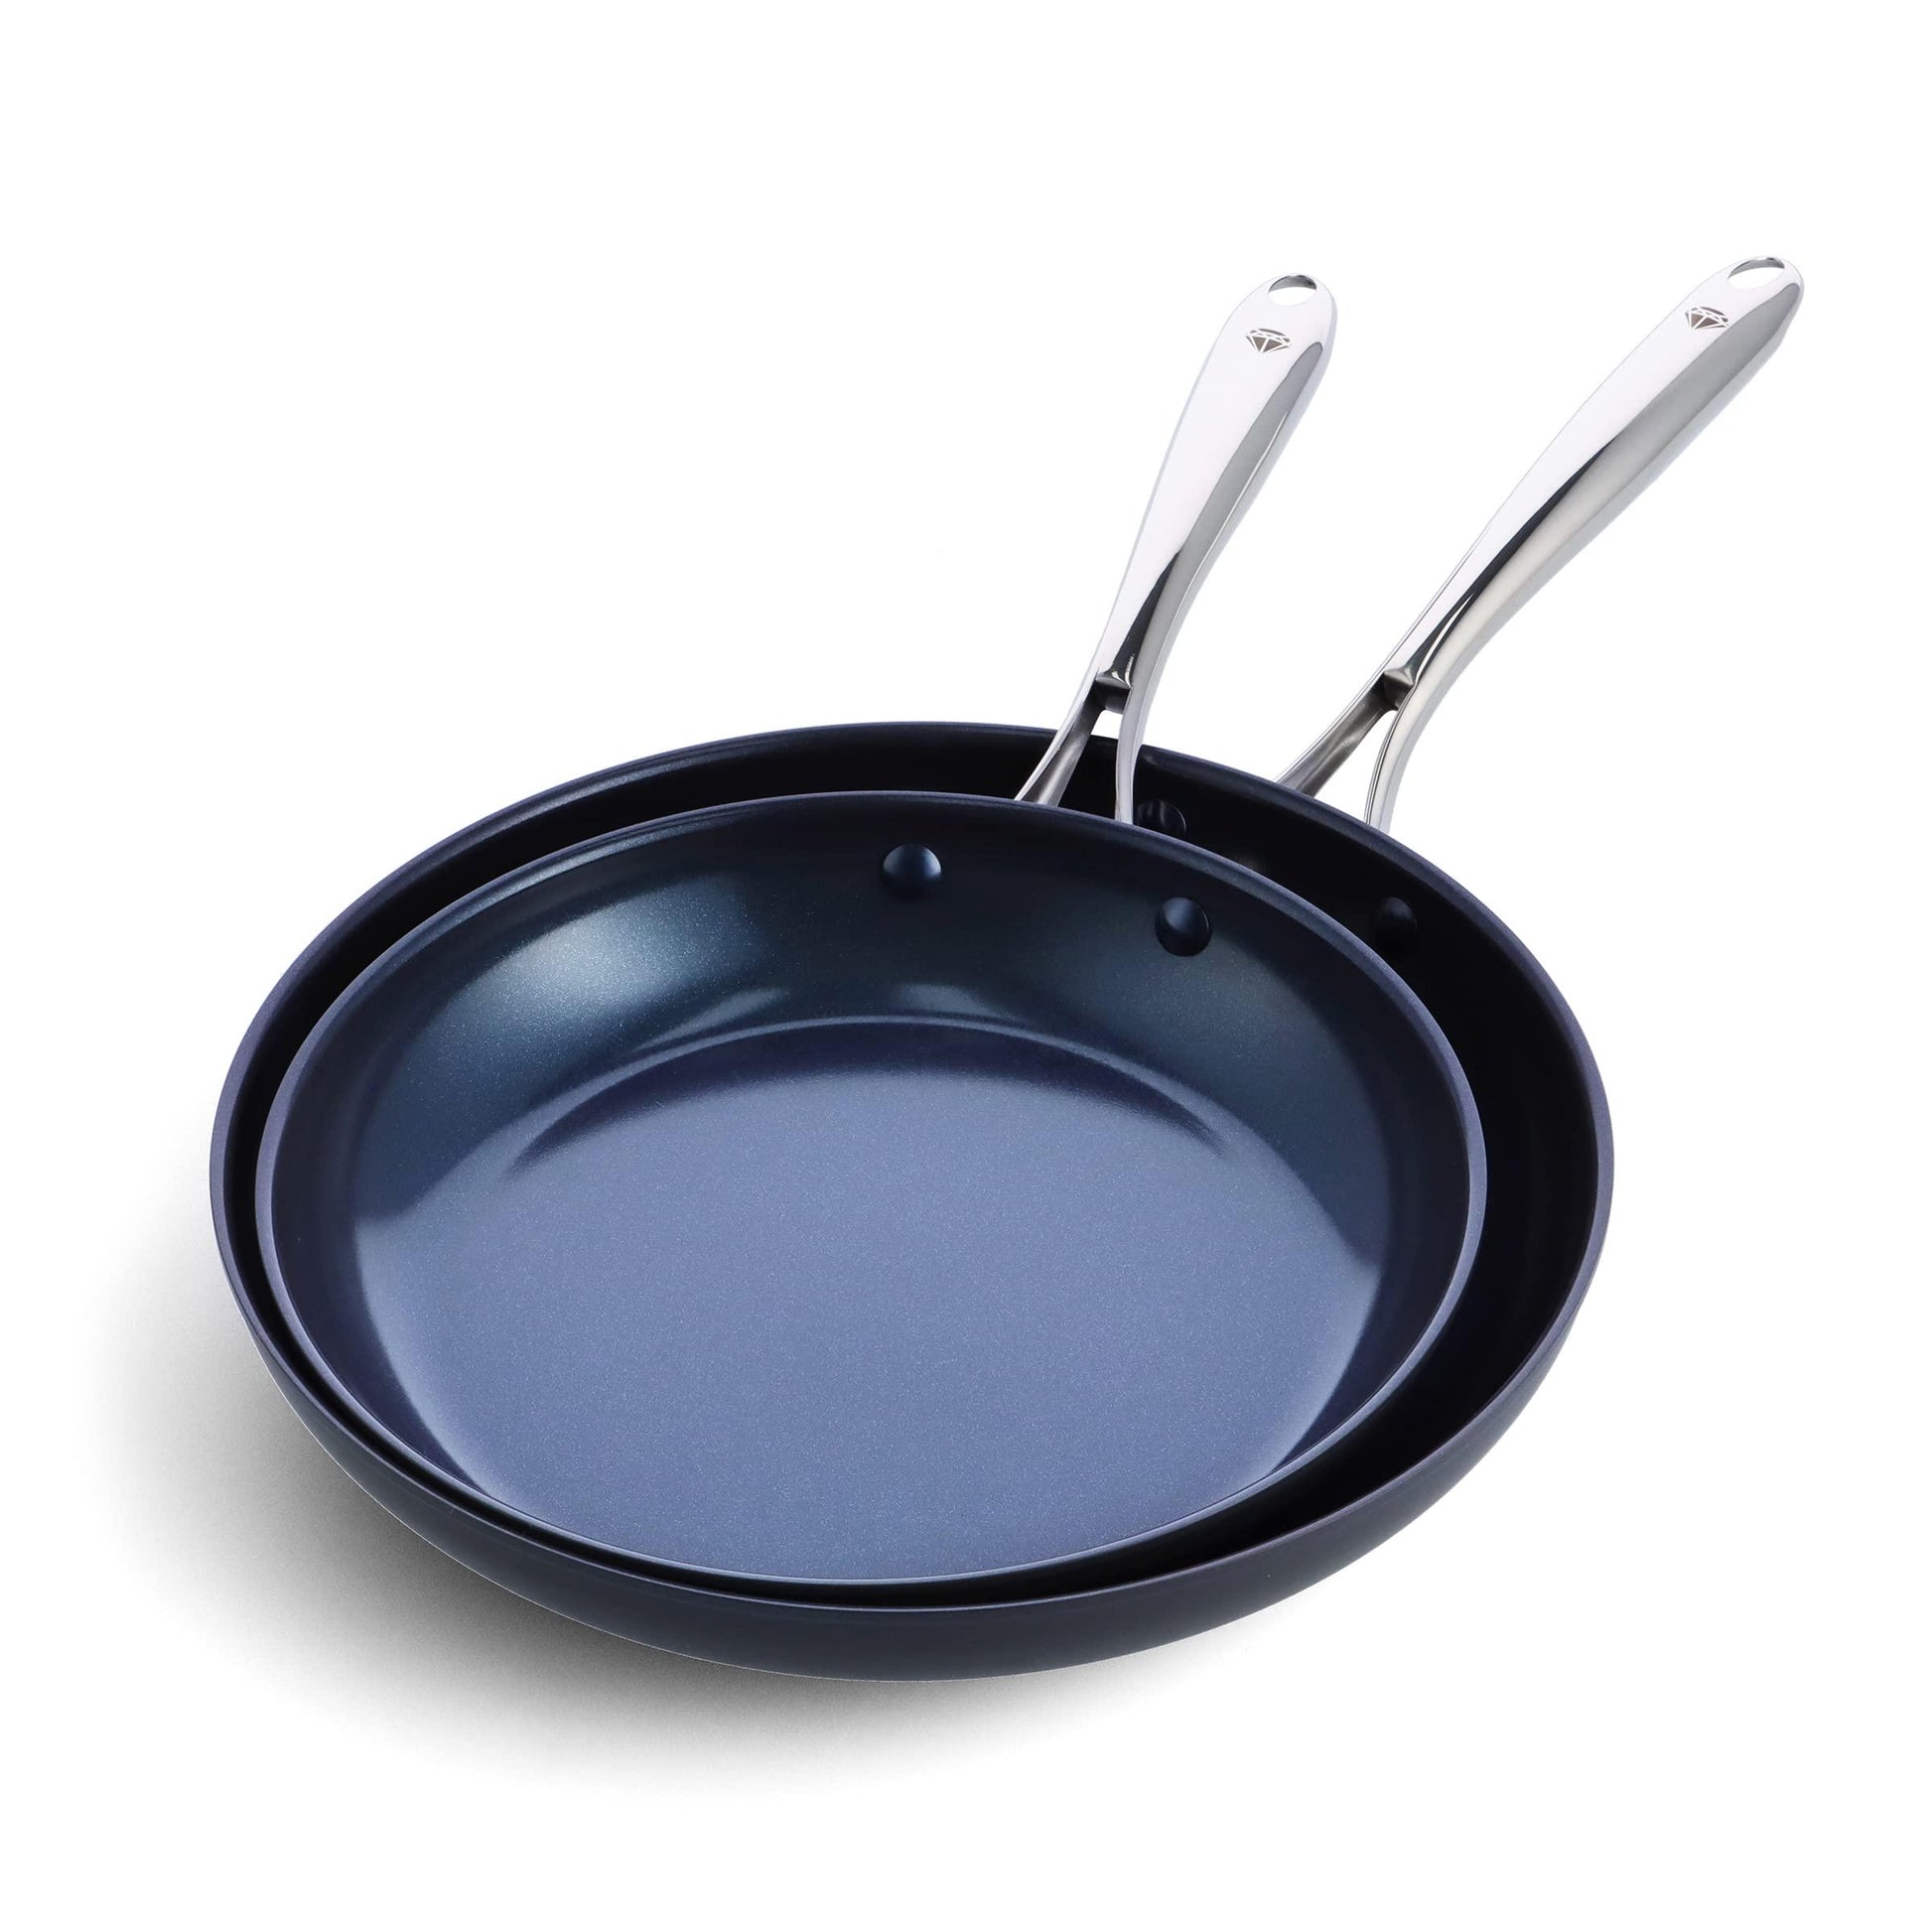 Blue Diamond Cookware Hard Anodized Ceramic Nonstick, 10" and 12" Frying Pan Skillet Set, PFAS-Free, Dishwasher Safe, Oven Safe, Grey - CookCave